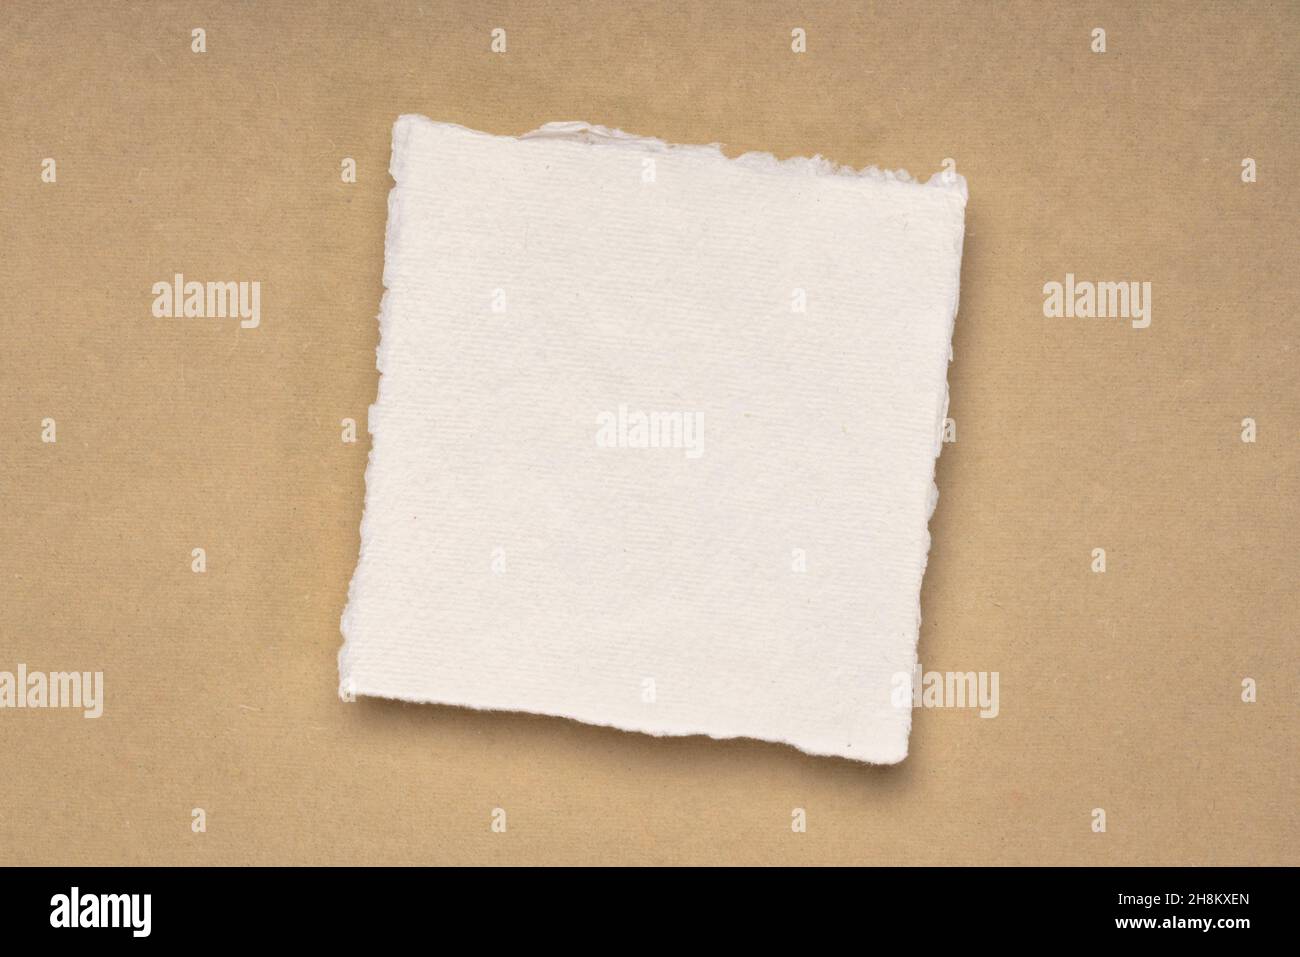 Small Square Sheet of Blank White Khadi Paper Against Marbled Paper Stock  Photo - Image of blank, pattern: 269610580